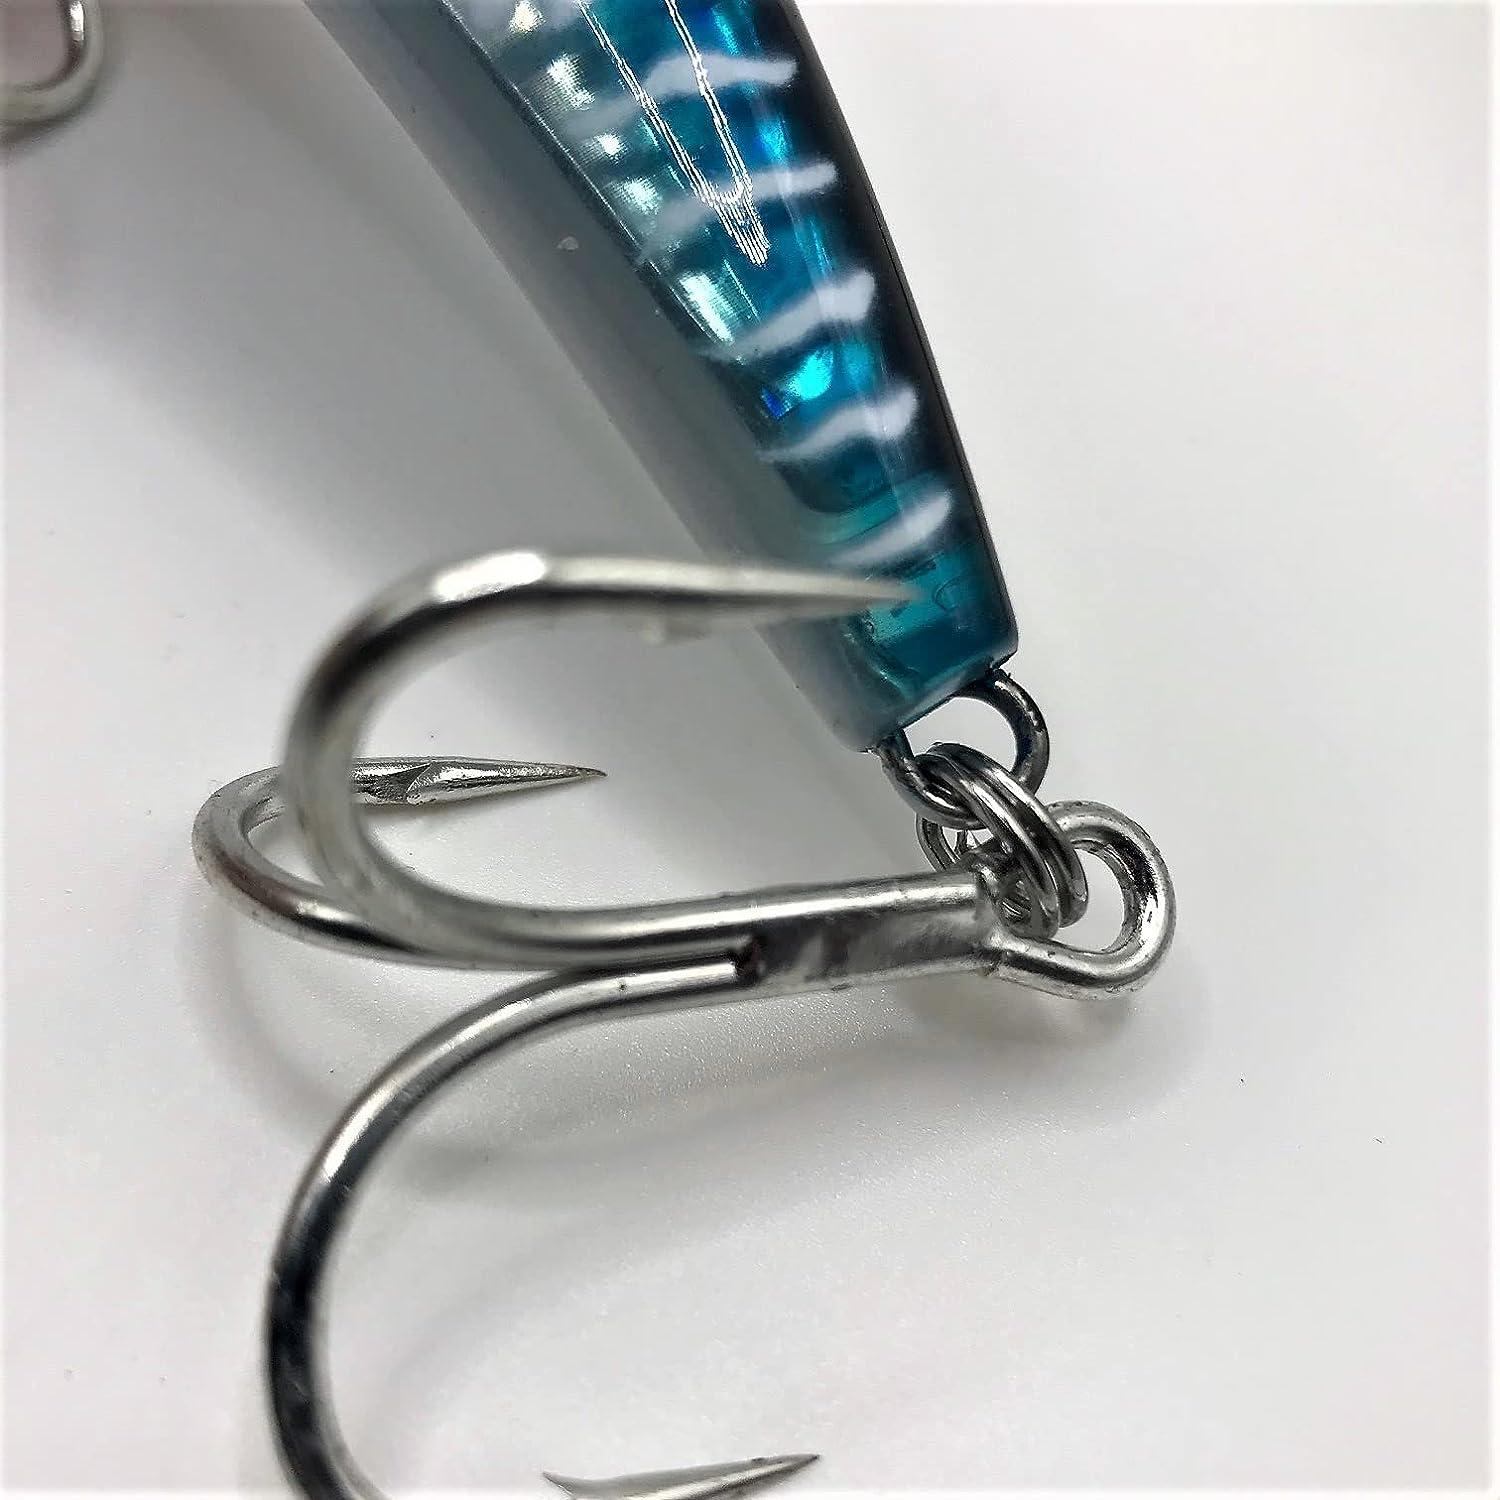 Deep Diving Saltwater trolling Lures for Striped Bass and Other Big Game  Fish 120mm/4.75 016